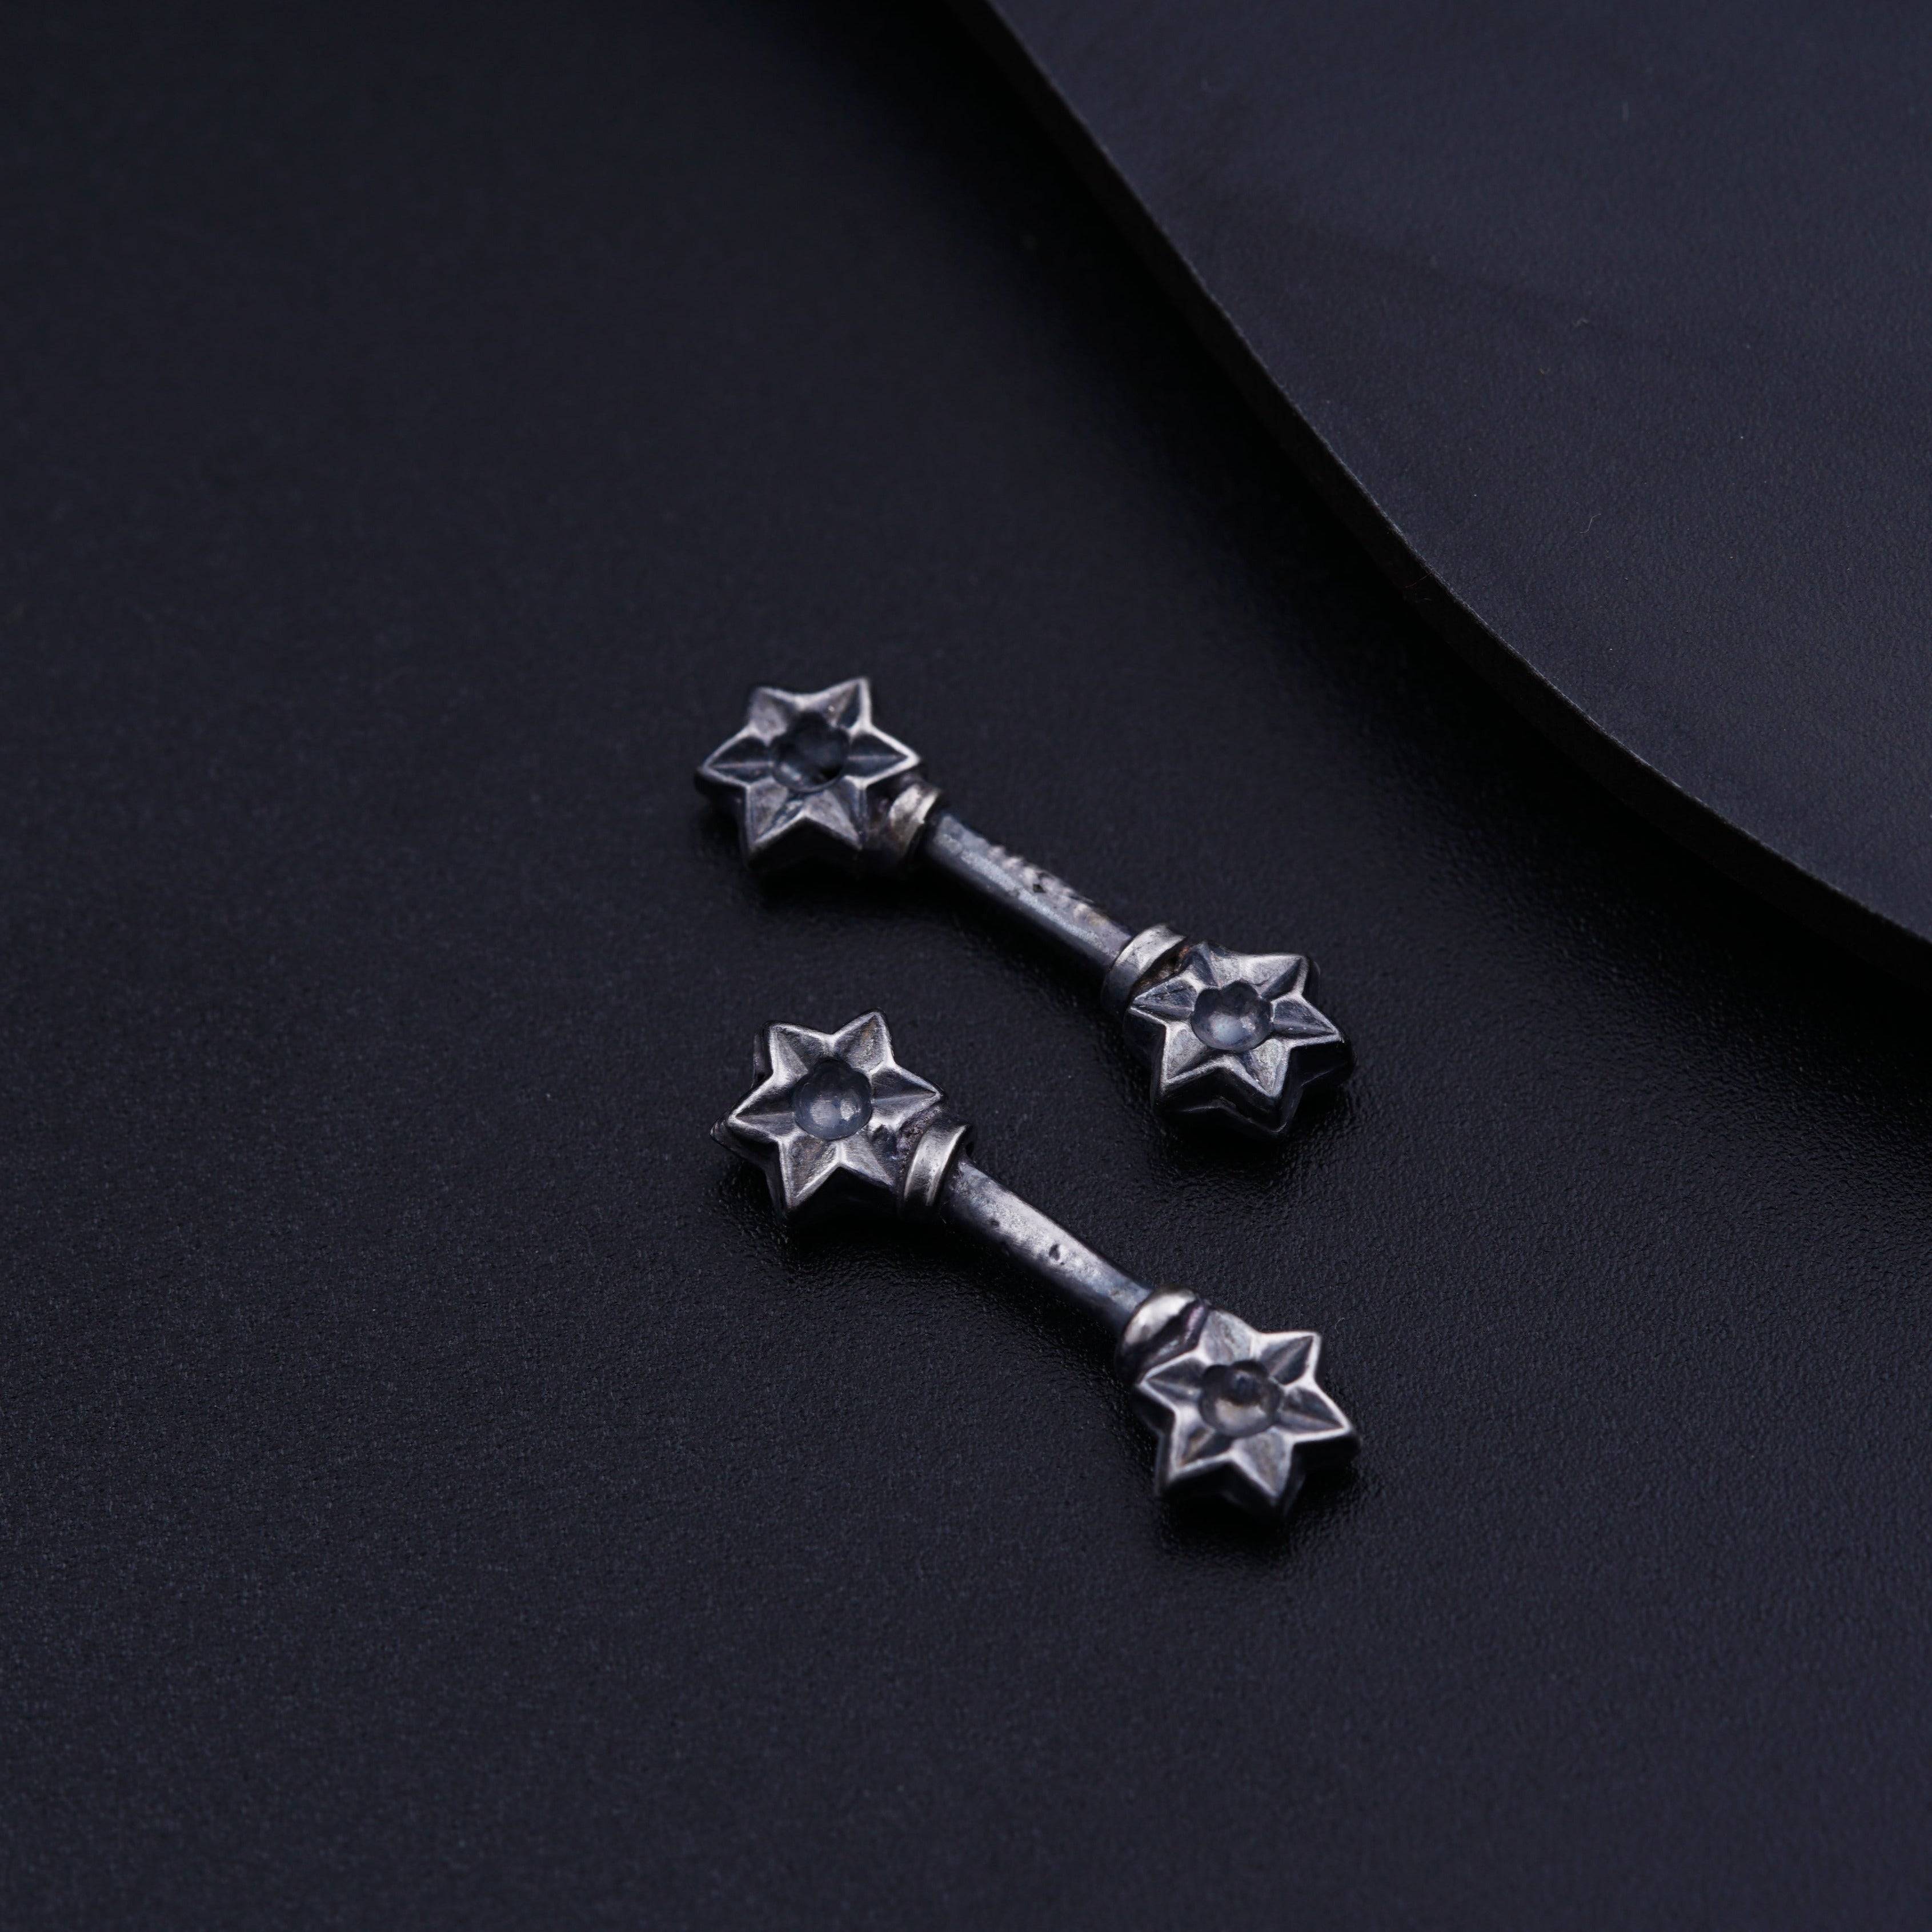 a pair of metal stars on a black surface